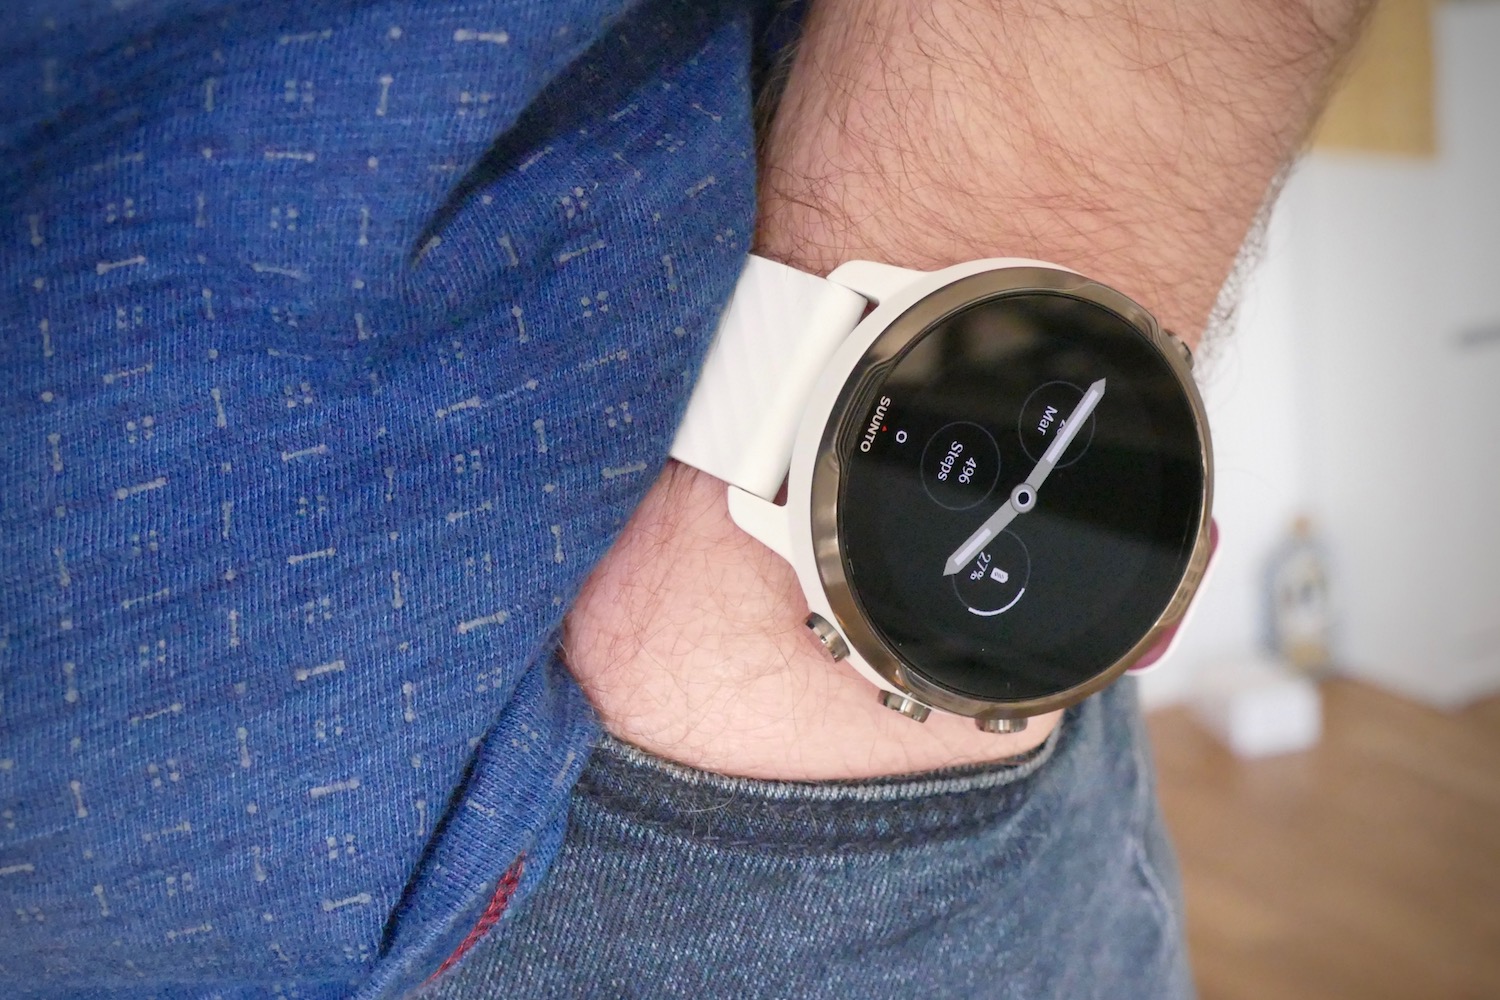 Suunto 7 Review: Finally, a Wear OS Watch I Don't Hate